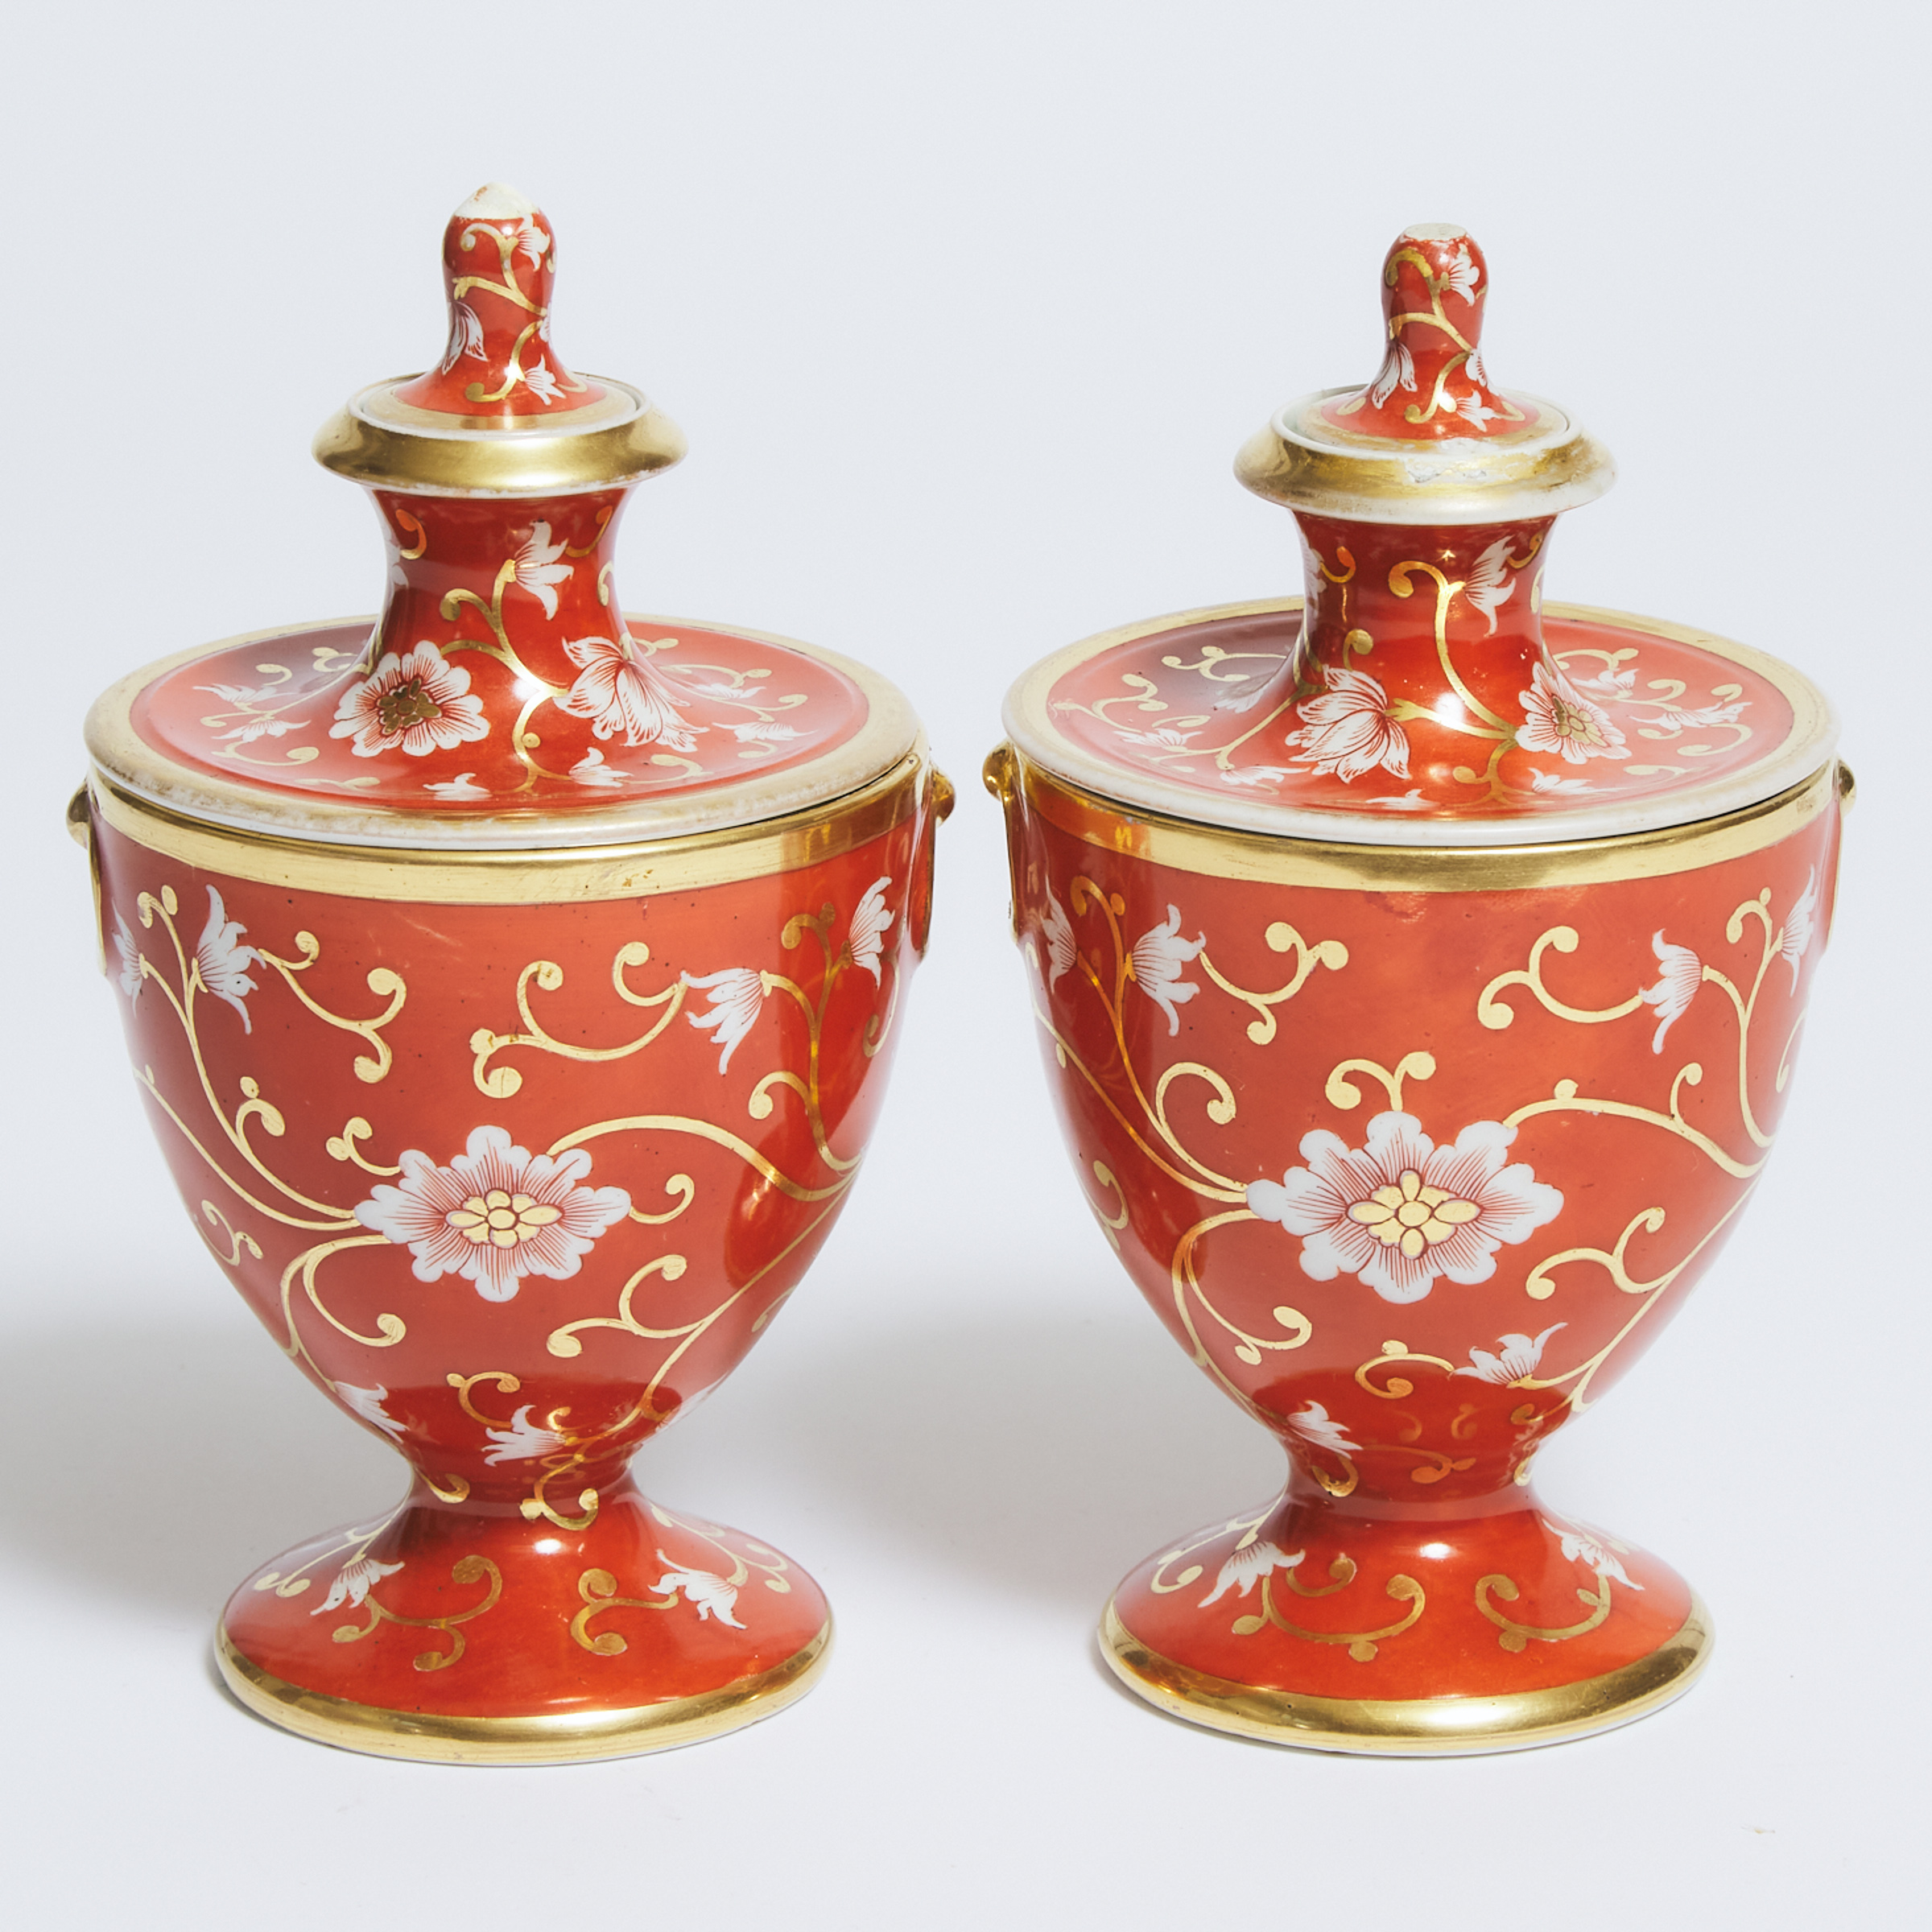 Pair of English Porcelain Vase-Candlesticks with Covers, early 19th century